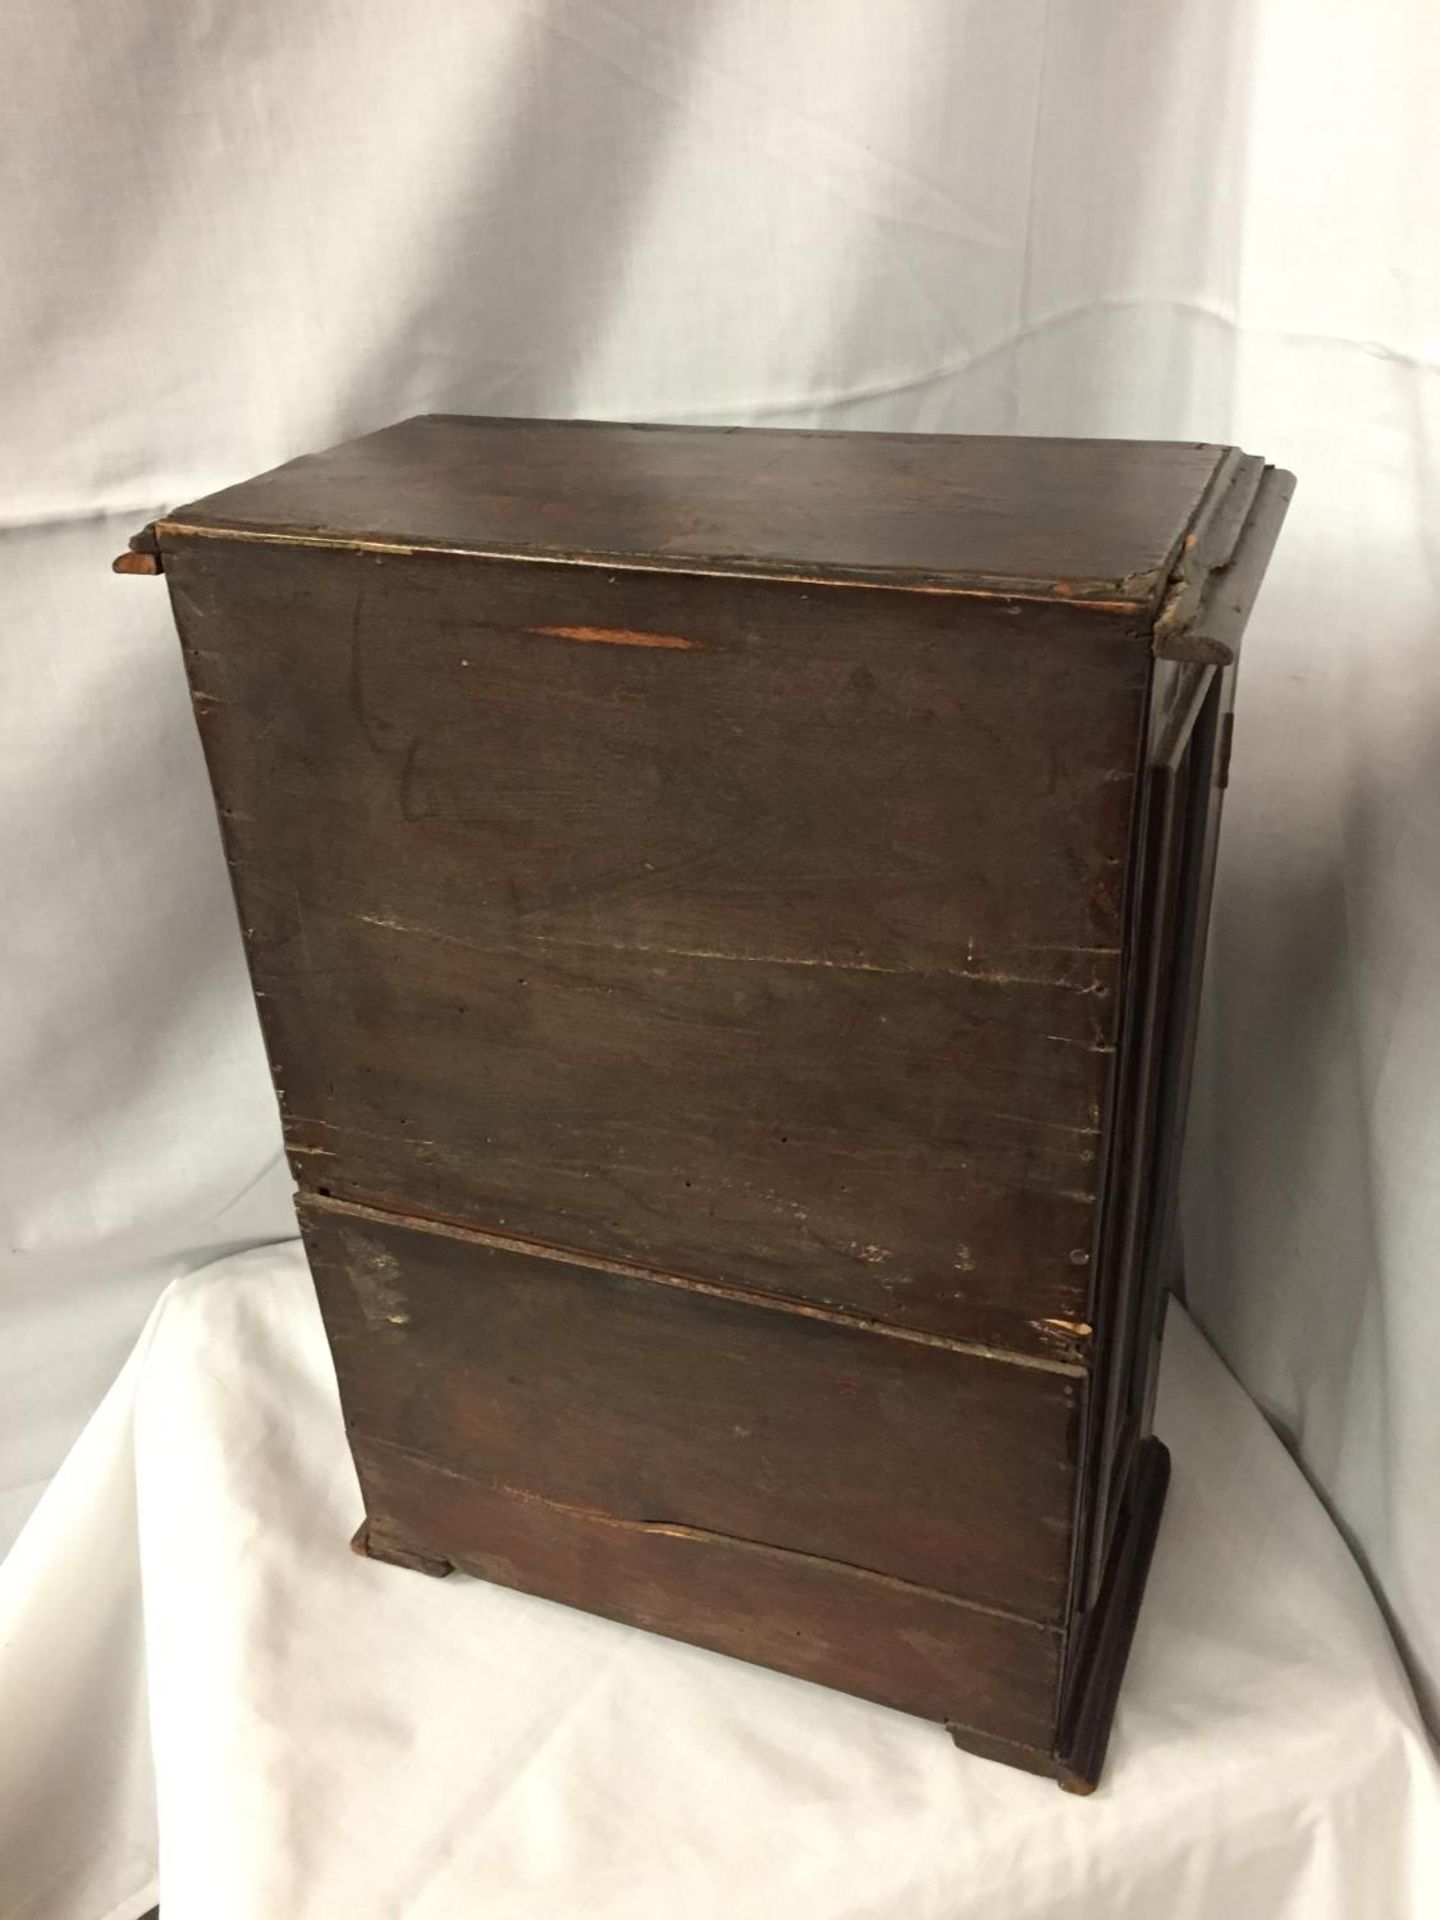 A WALNUT MINATURE CABINET TO INCORPORATE SEVEN DRAWERS 44CM HIGH POSSIBLY A WATCH MAKERS CABINET - Image 5 of 5